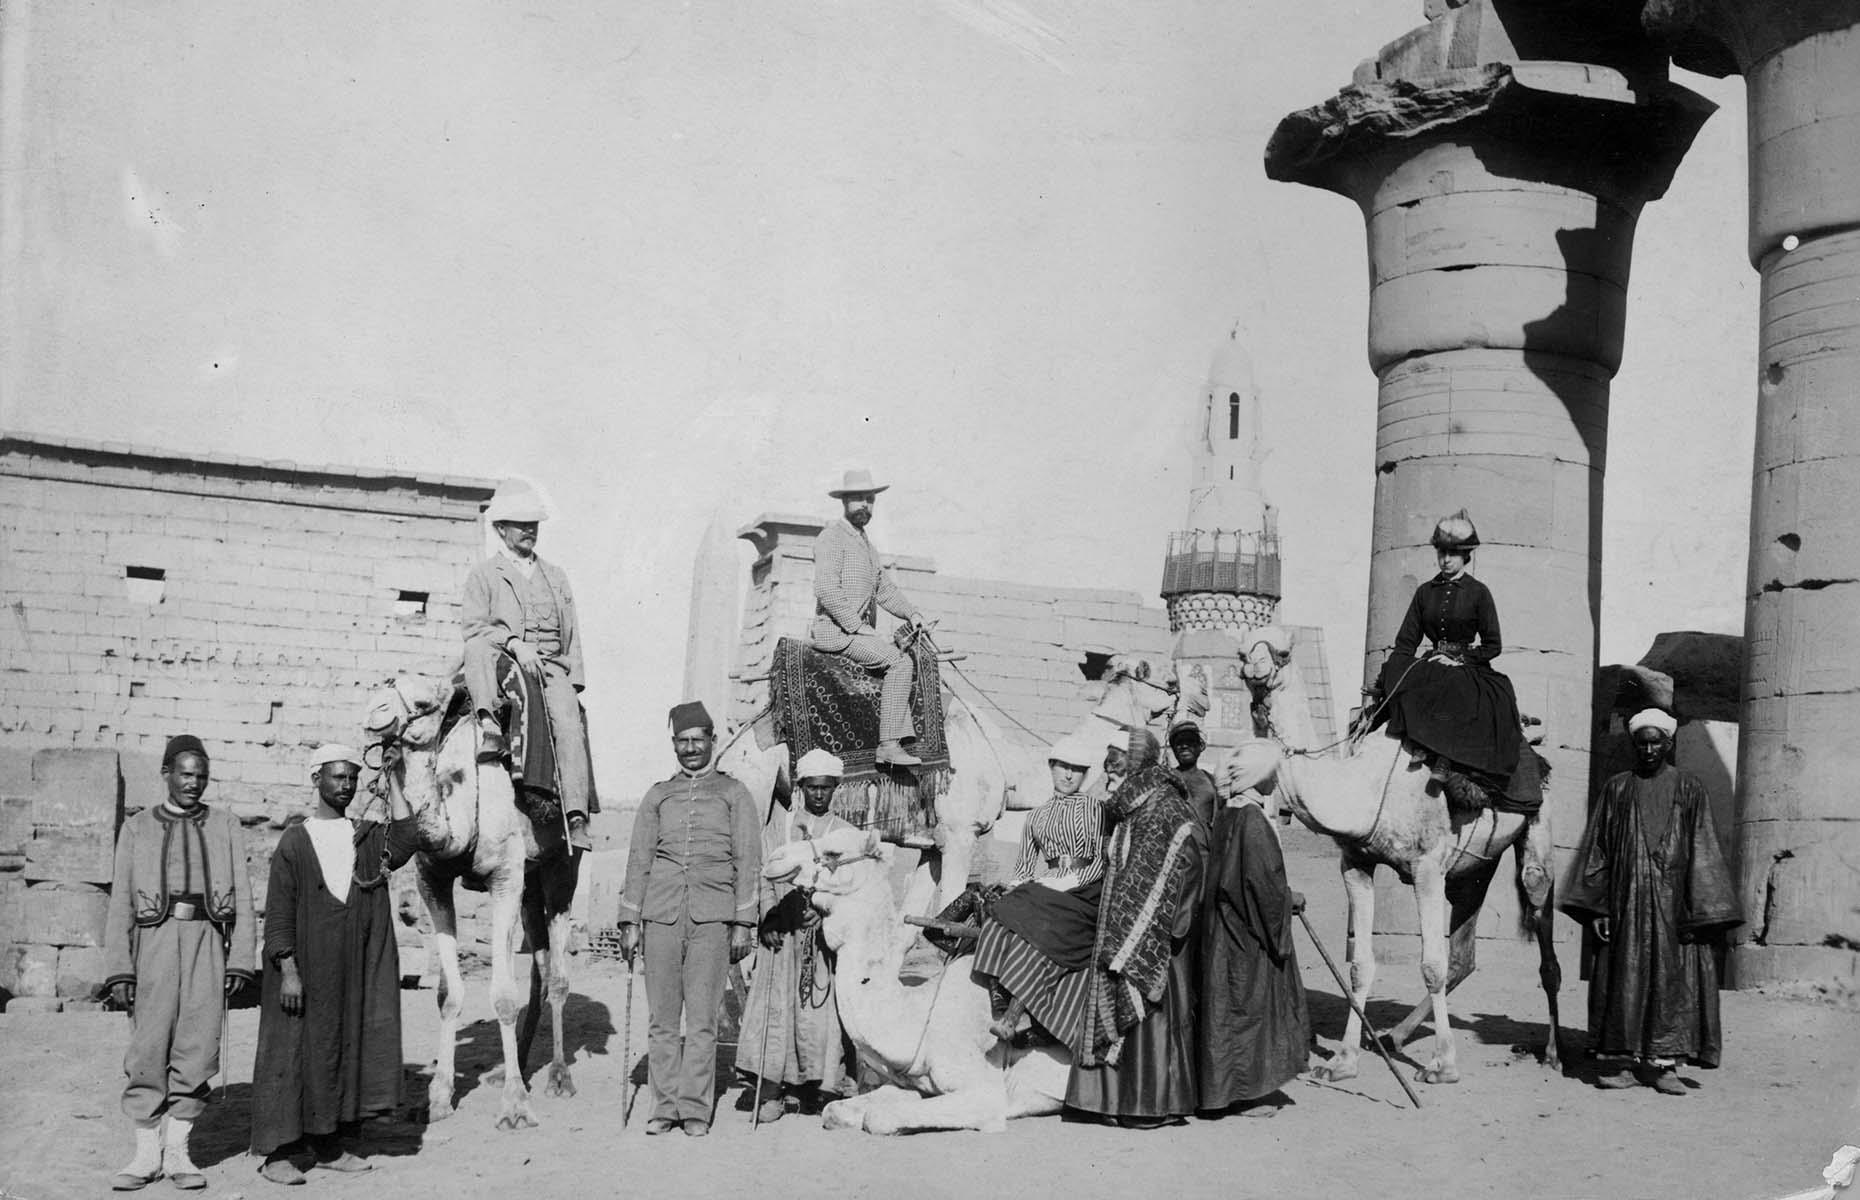 In the Victorian era, Egypt's enticing history and wealth of ancient monuments were particularly popular with wealthy travelers from Britain. Those with cash to spare (and often investments to check out) would journey to Egypt and embark on a grand tour of the country, exploring Cairo, Giza, Luxor and Aswan on a Nile cruise. Here a group of Victorian tourists and their guides are photographed at the Temple of Karnak in Luxor in 1870.